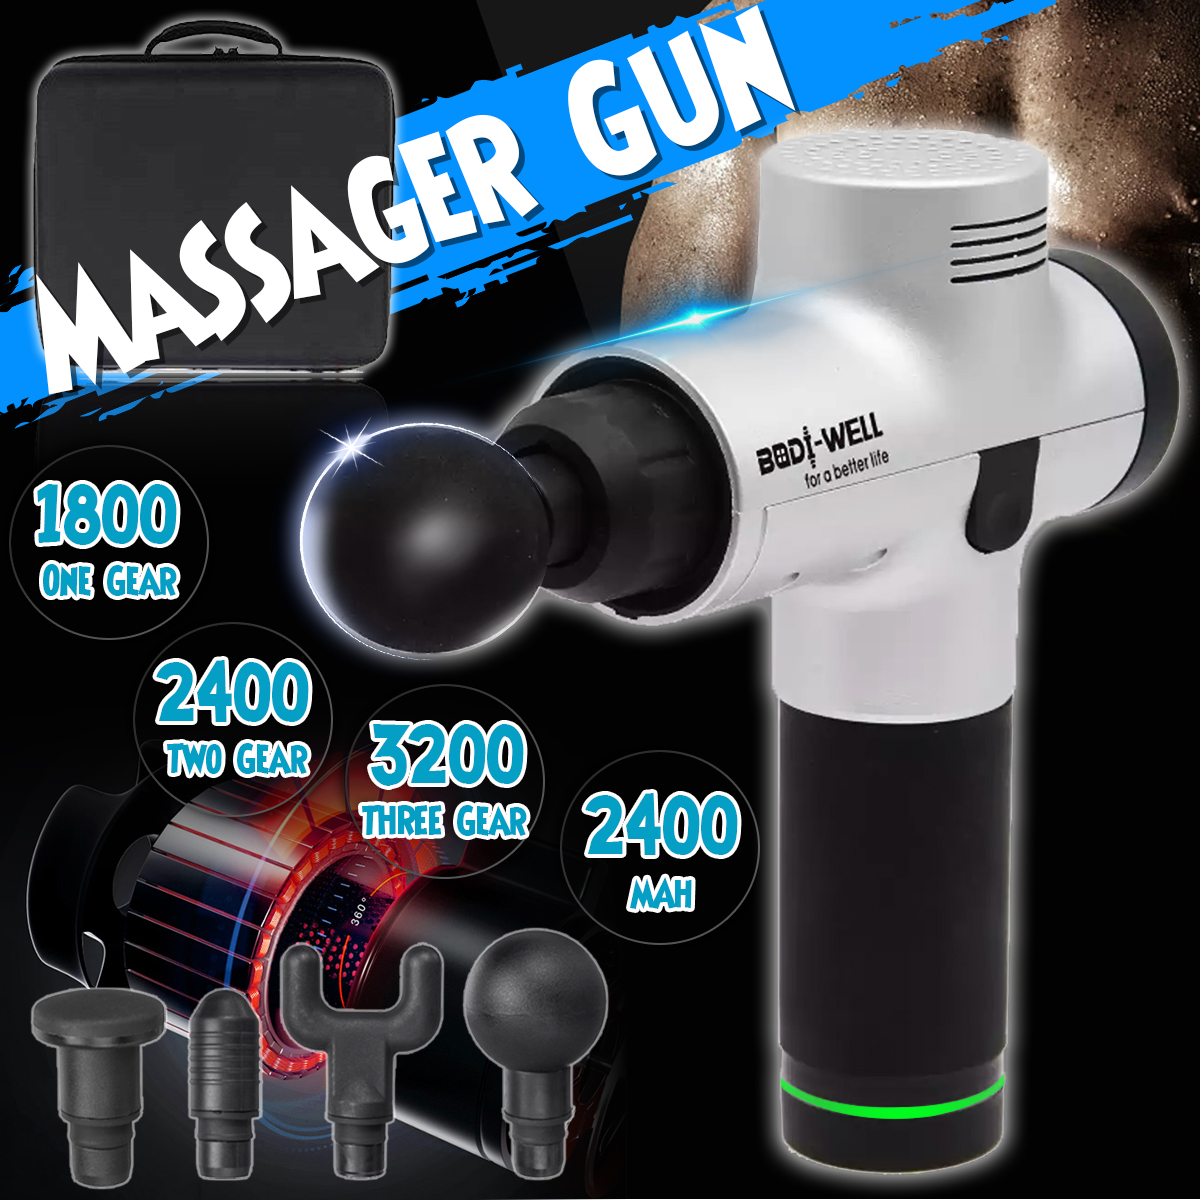 2400-mAh-Percussion-Massage-Deep-Tissue-Electric-Massager-Cordless-Massag-Device-for-Body-Pain-Relie-1536268-2